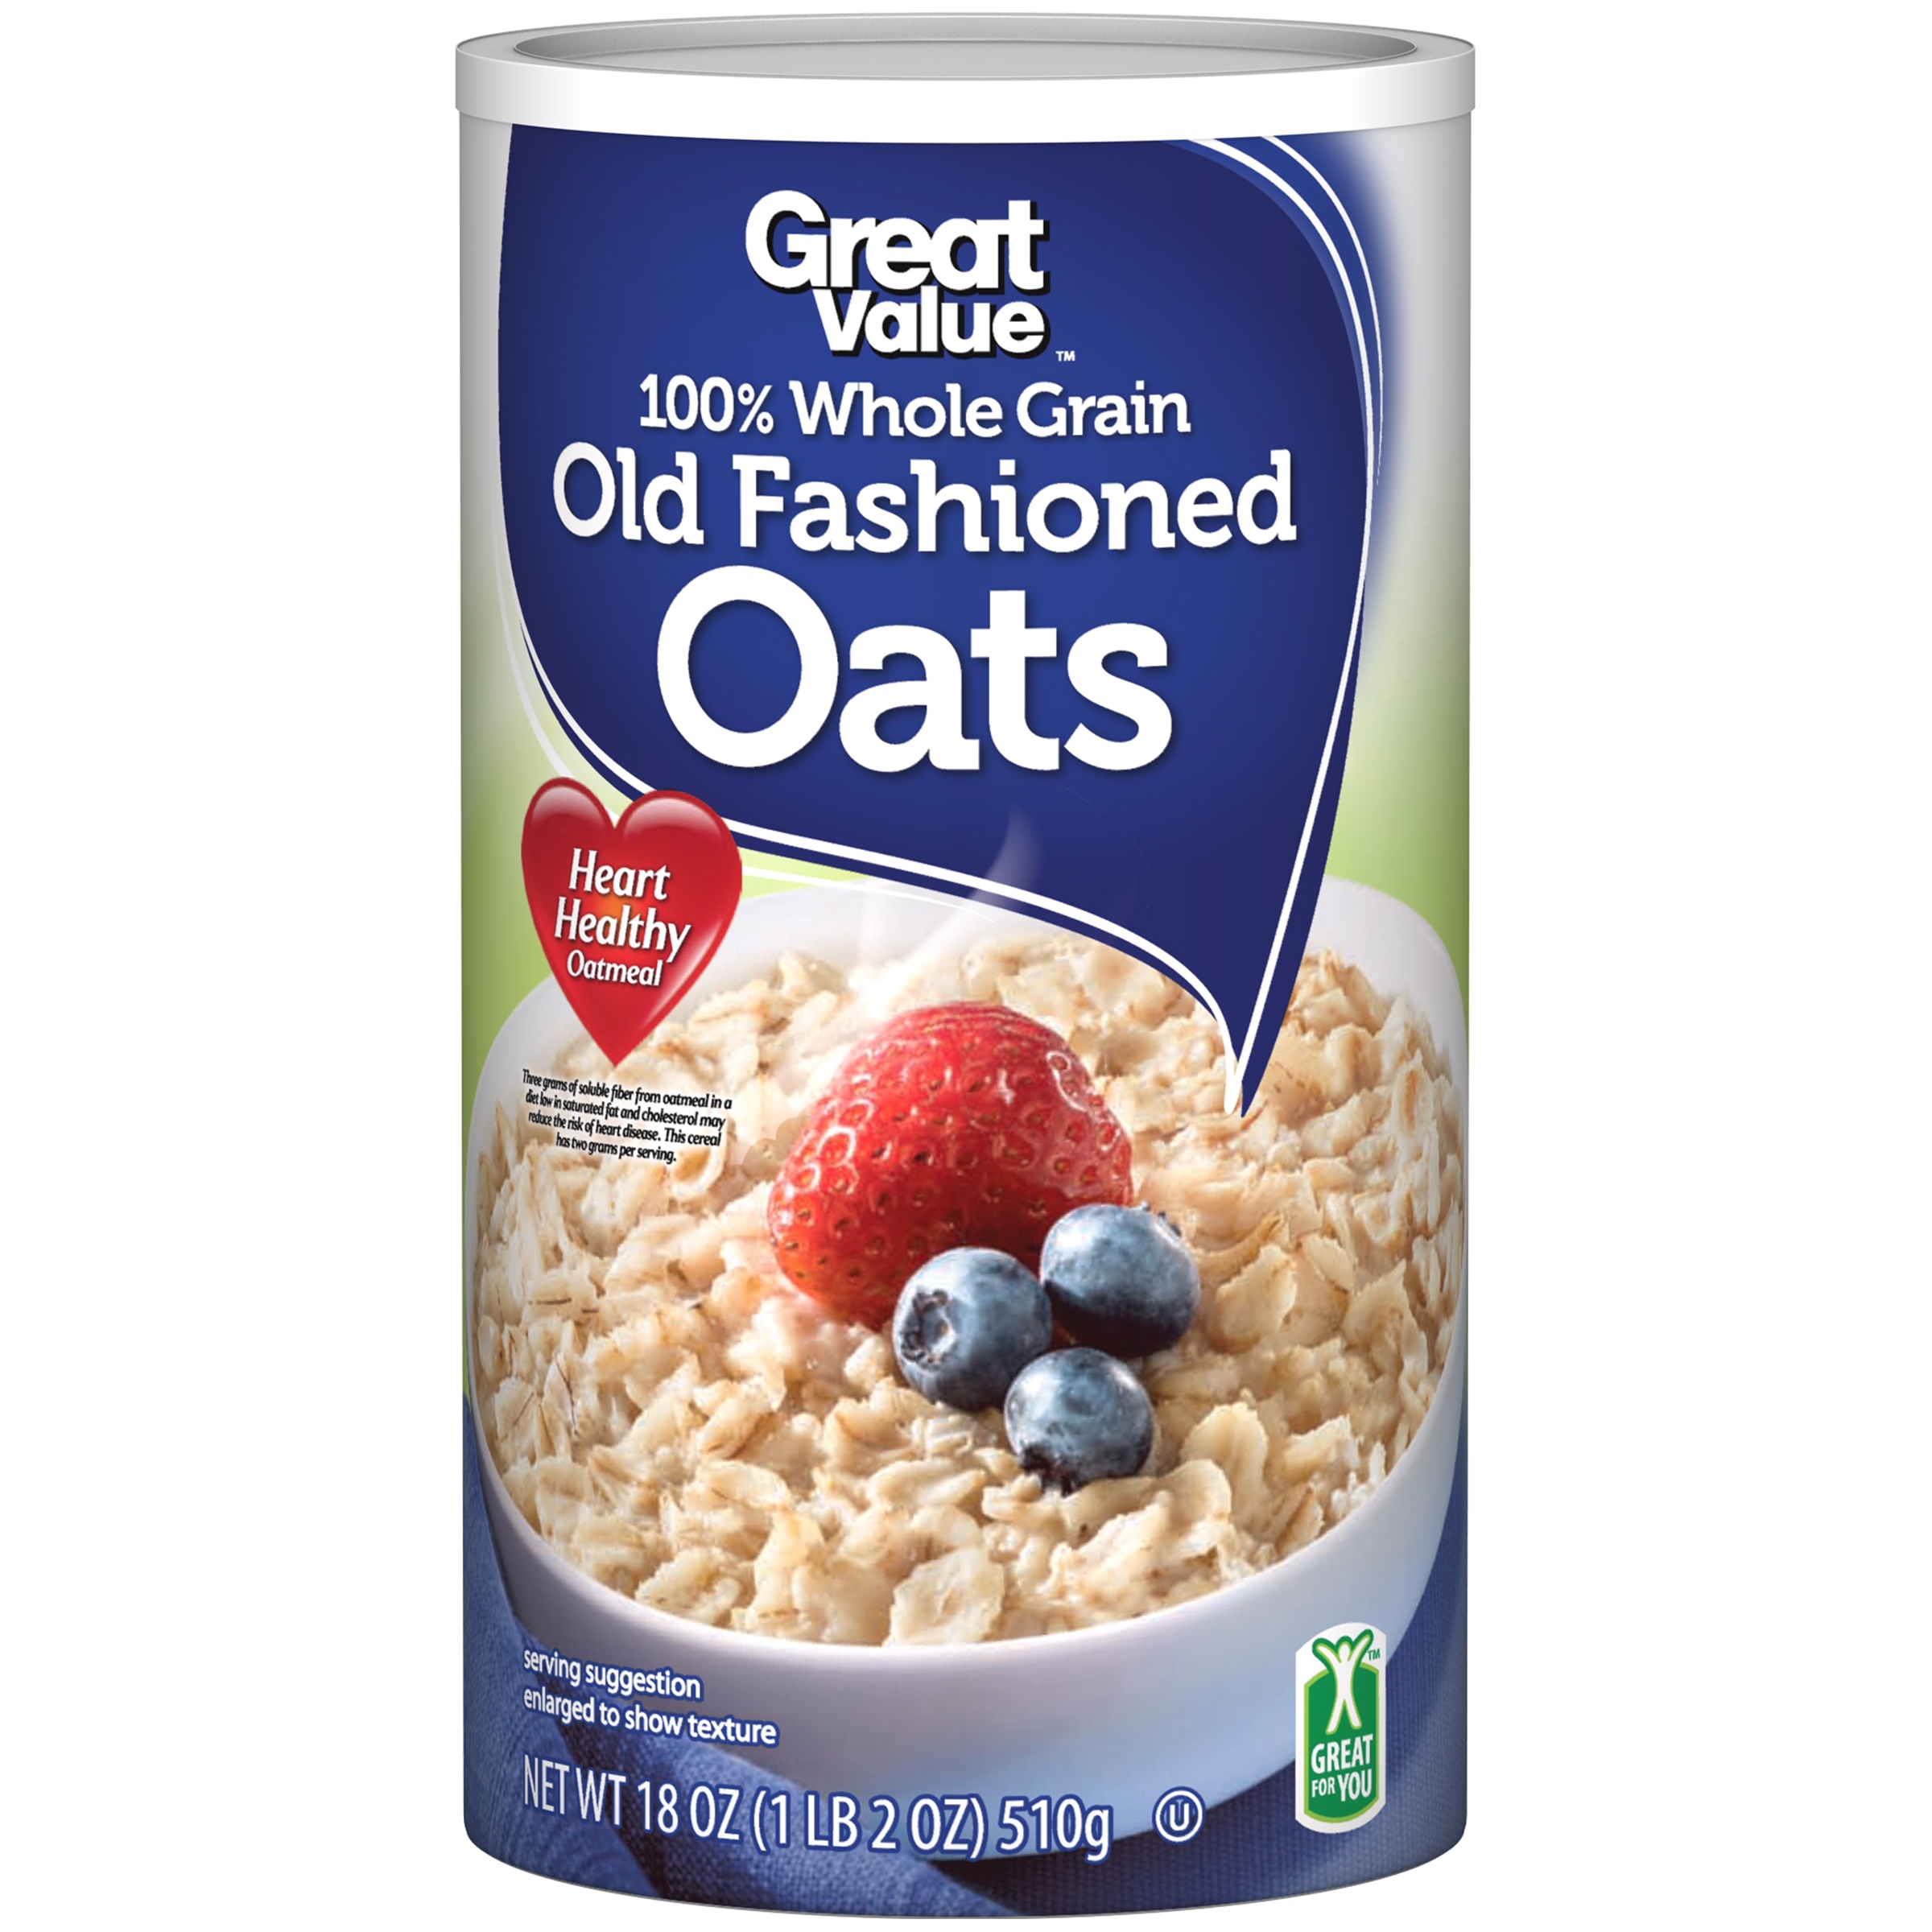 (4 Pack) Great Value 100% Whole Grain Old Fashioned Oats, 18 Oz Image